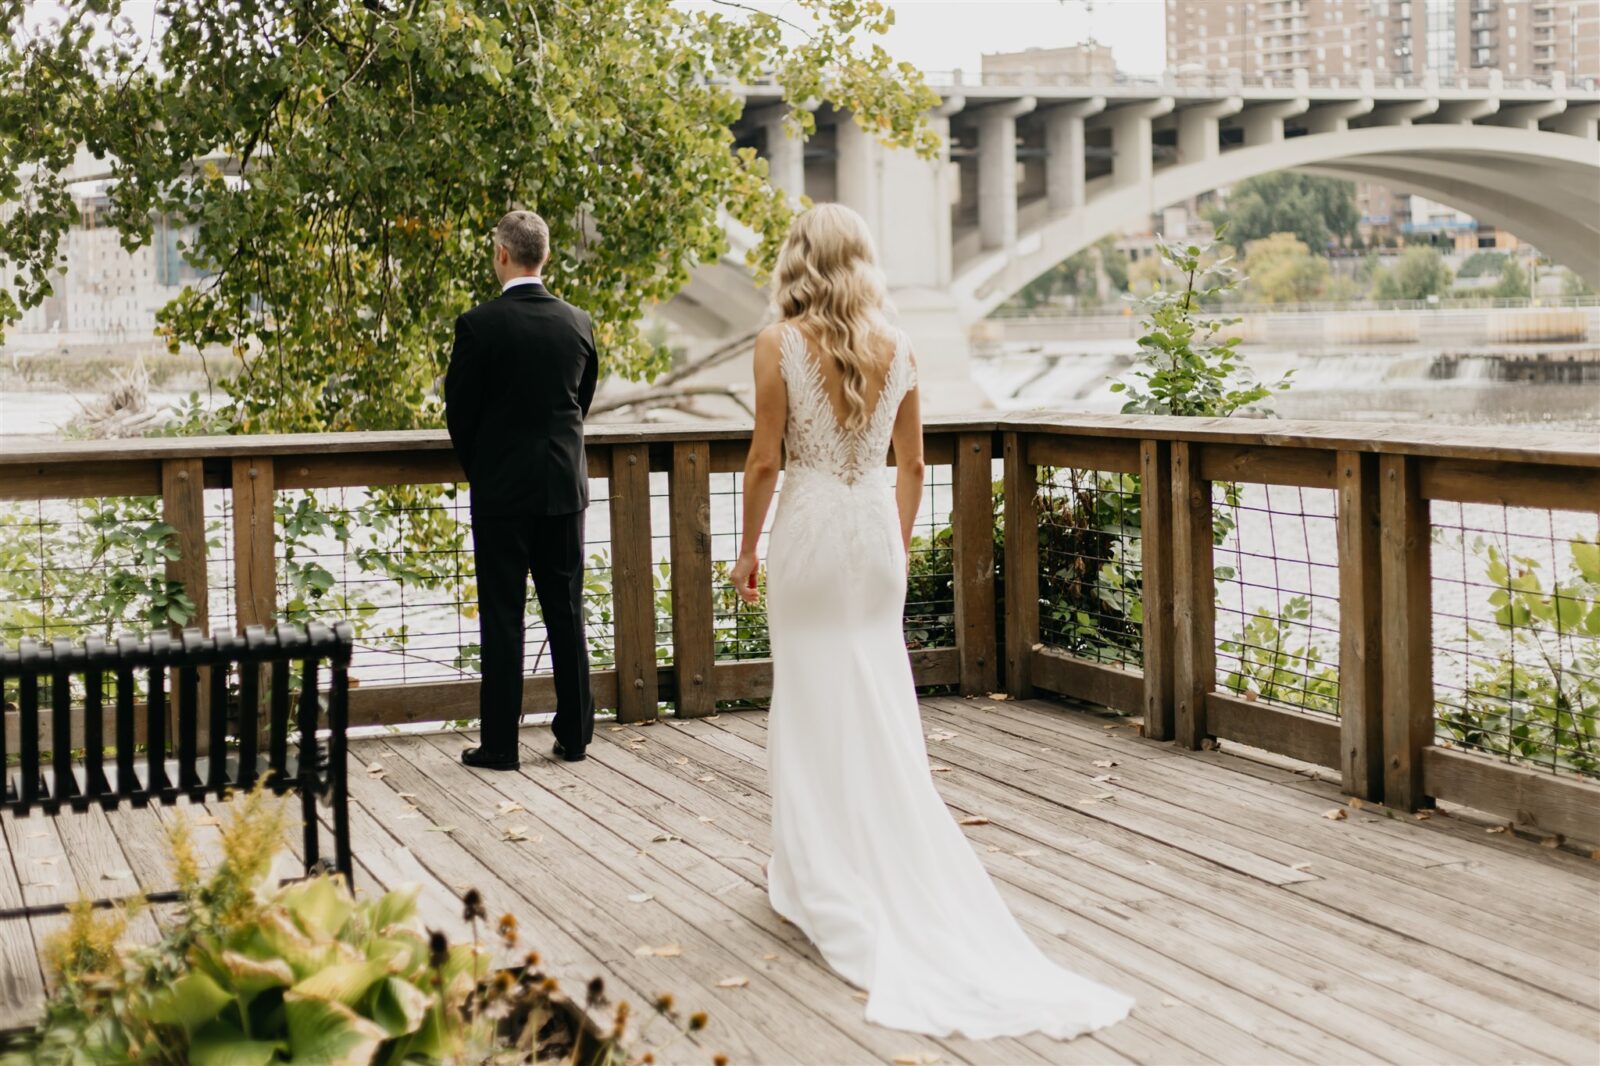 First look of the bride and groom at Nicollet Island Pavilion